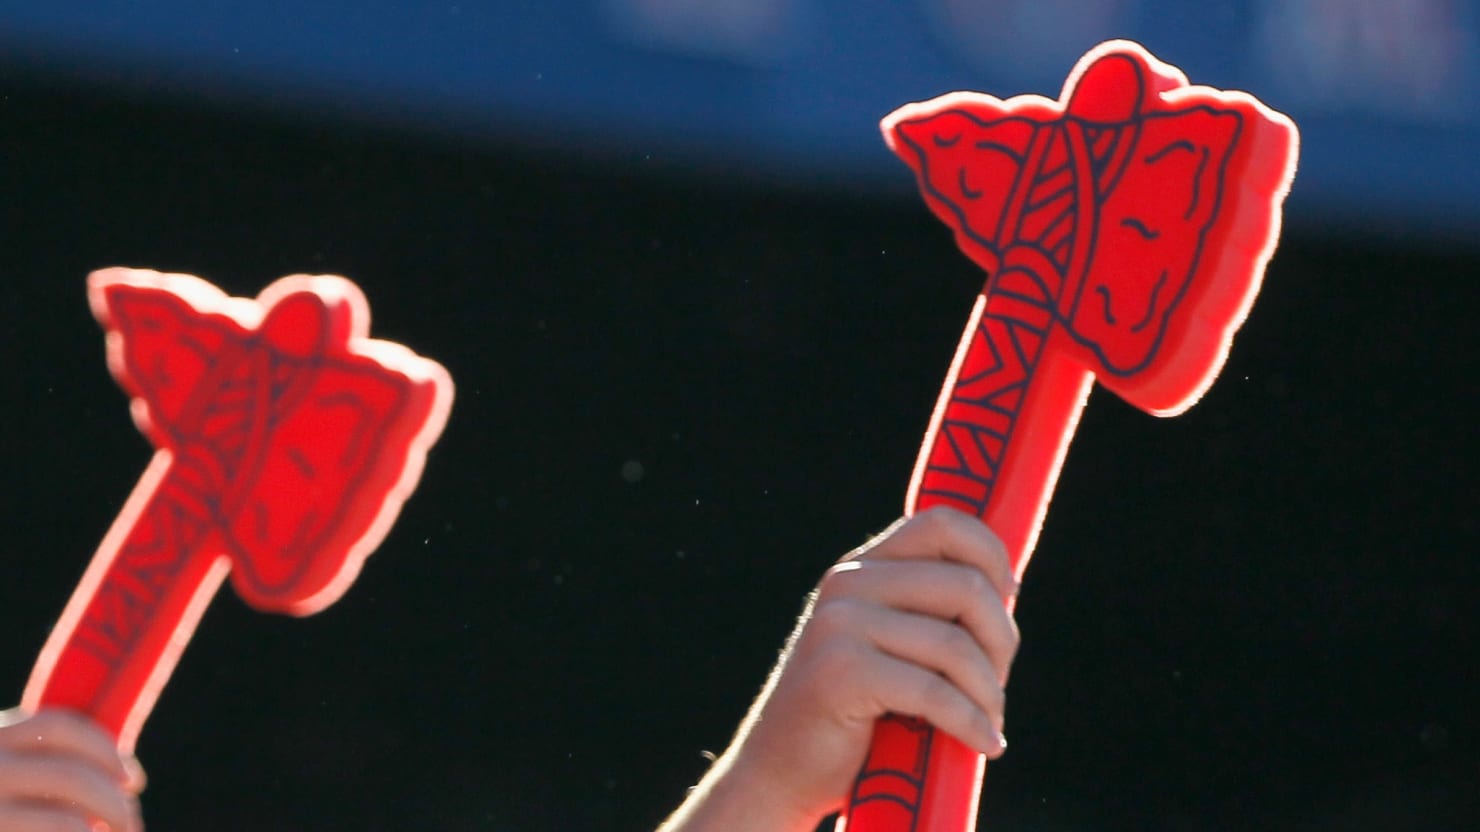 Braves shelve foam tomahawks 'out of respect' for Cardinals